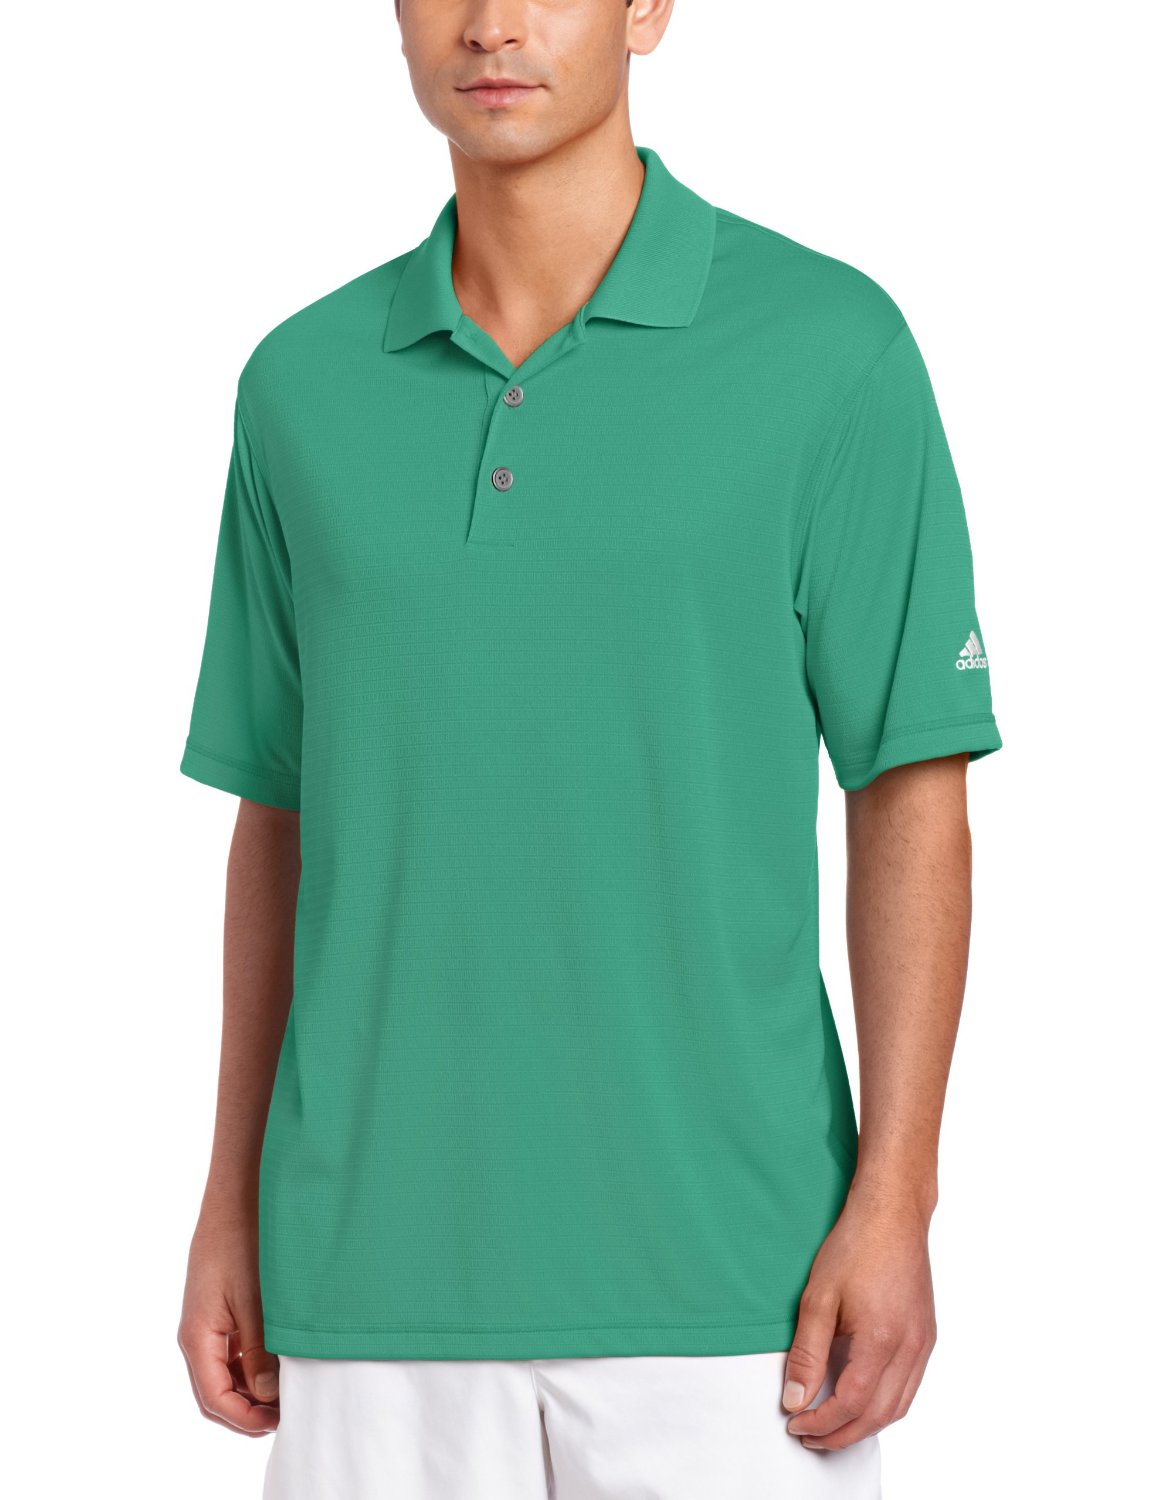 Mens Climalite Solid Golf Polo Shirts